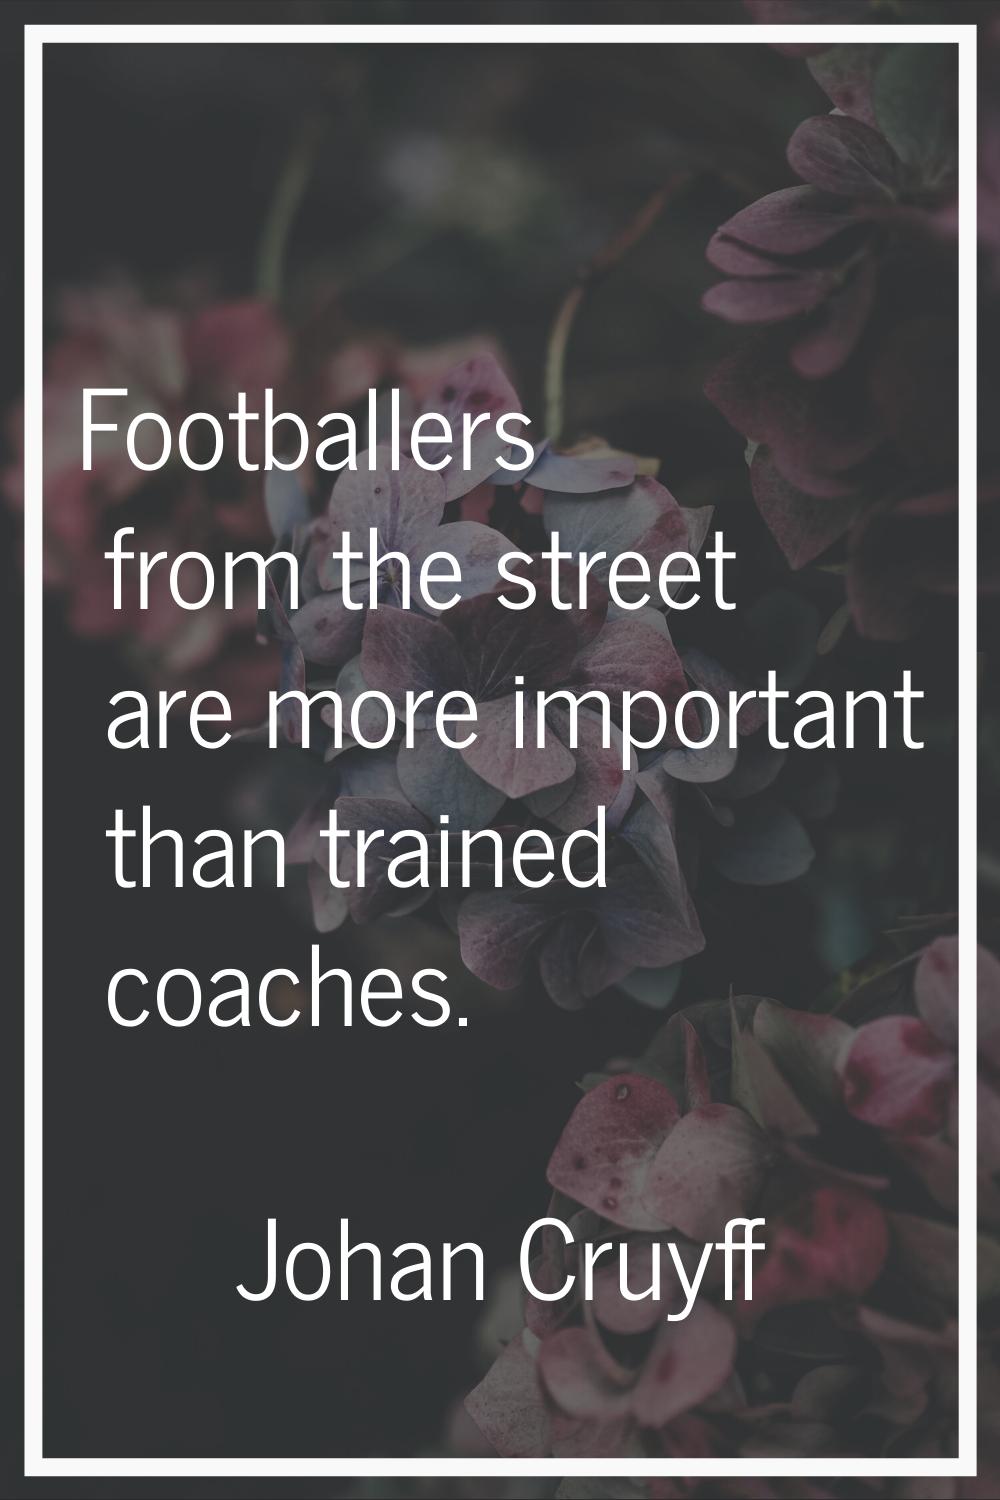 Footballers from the street are more important than trained coaches.